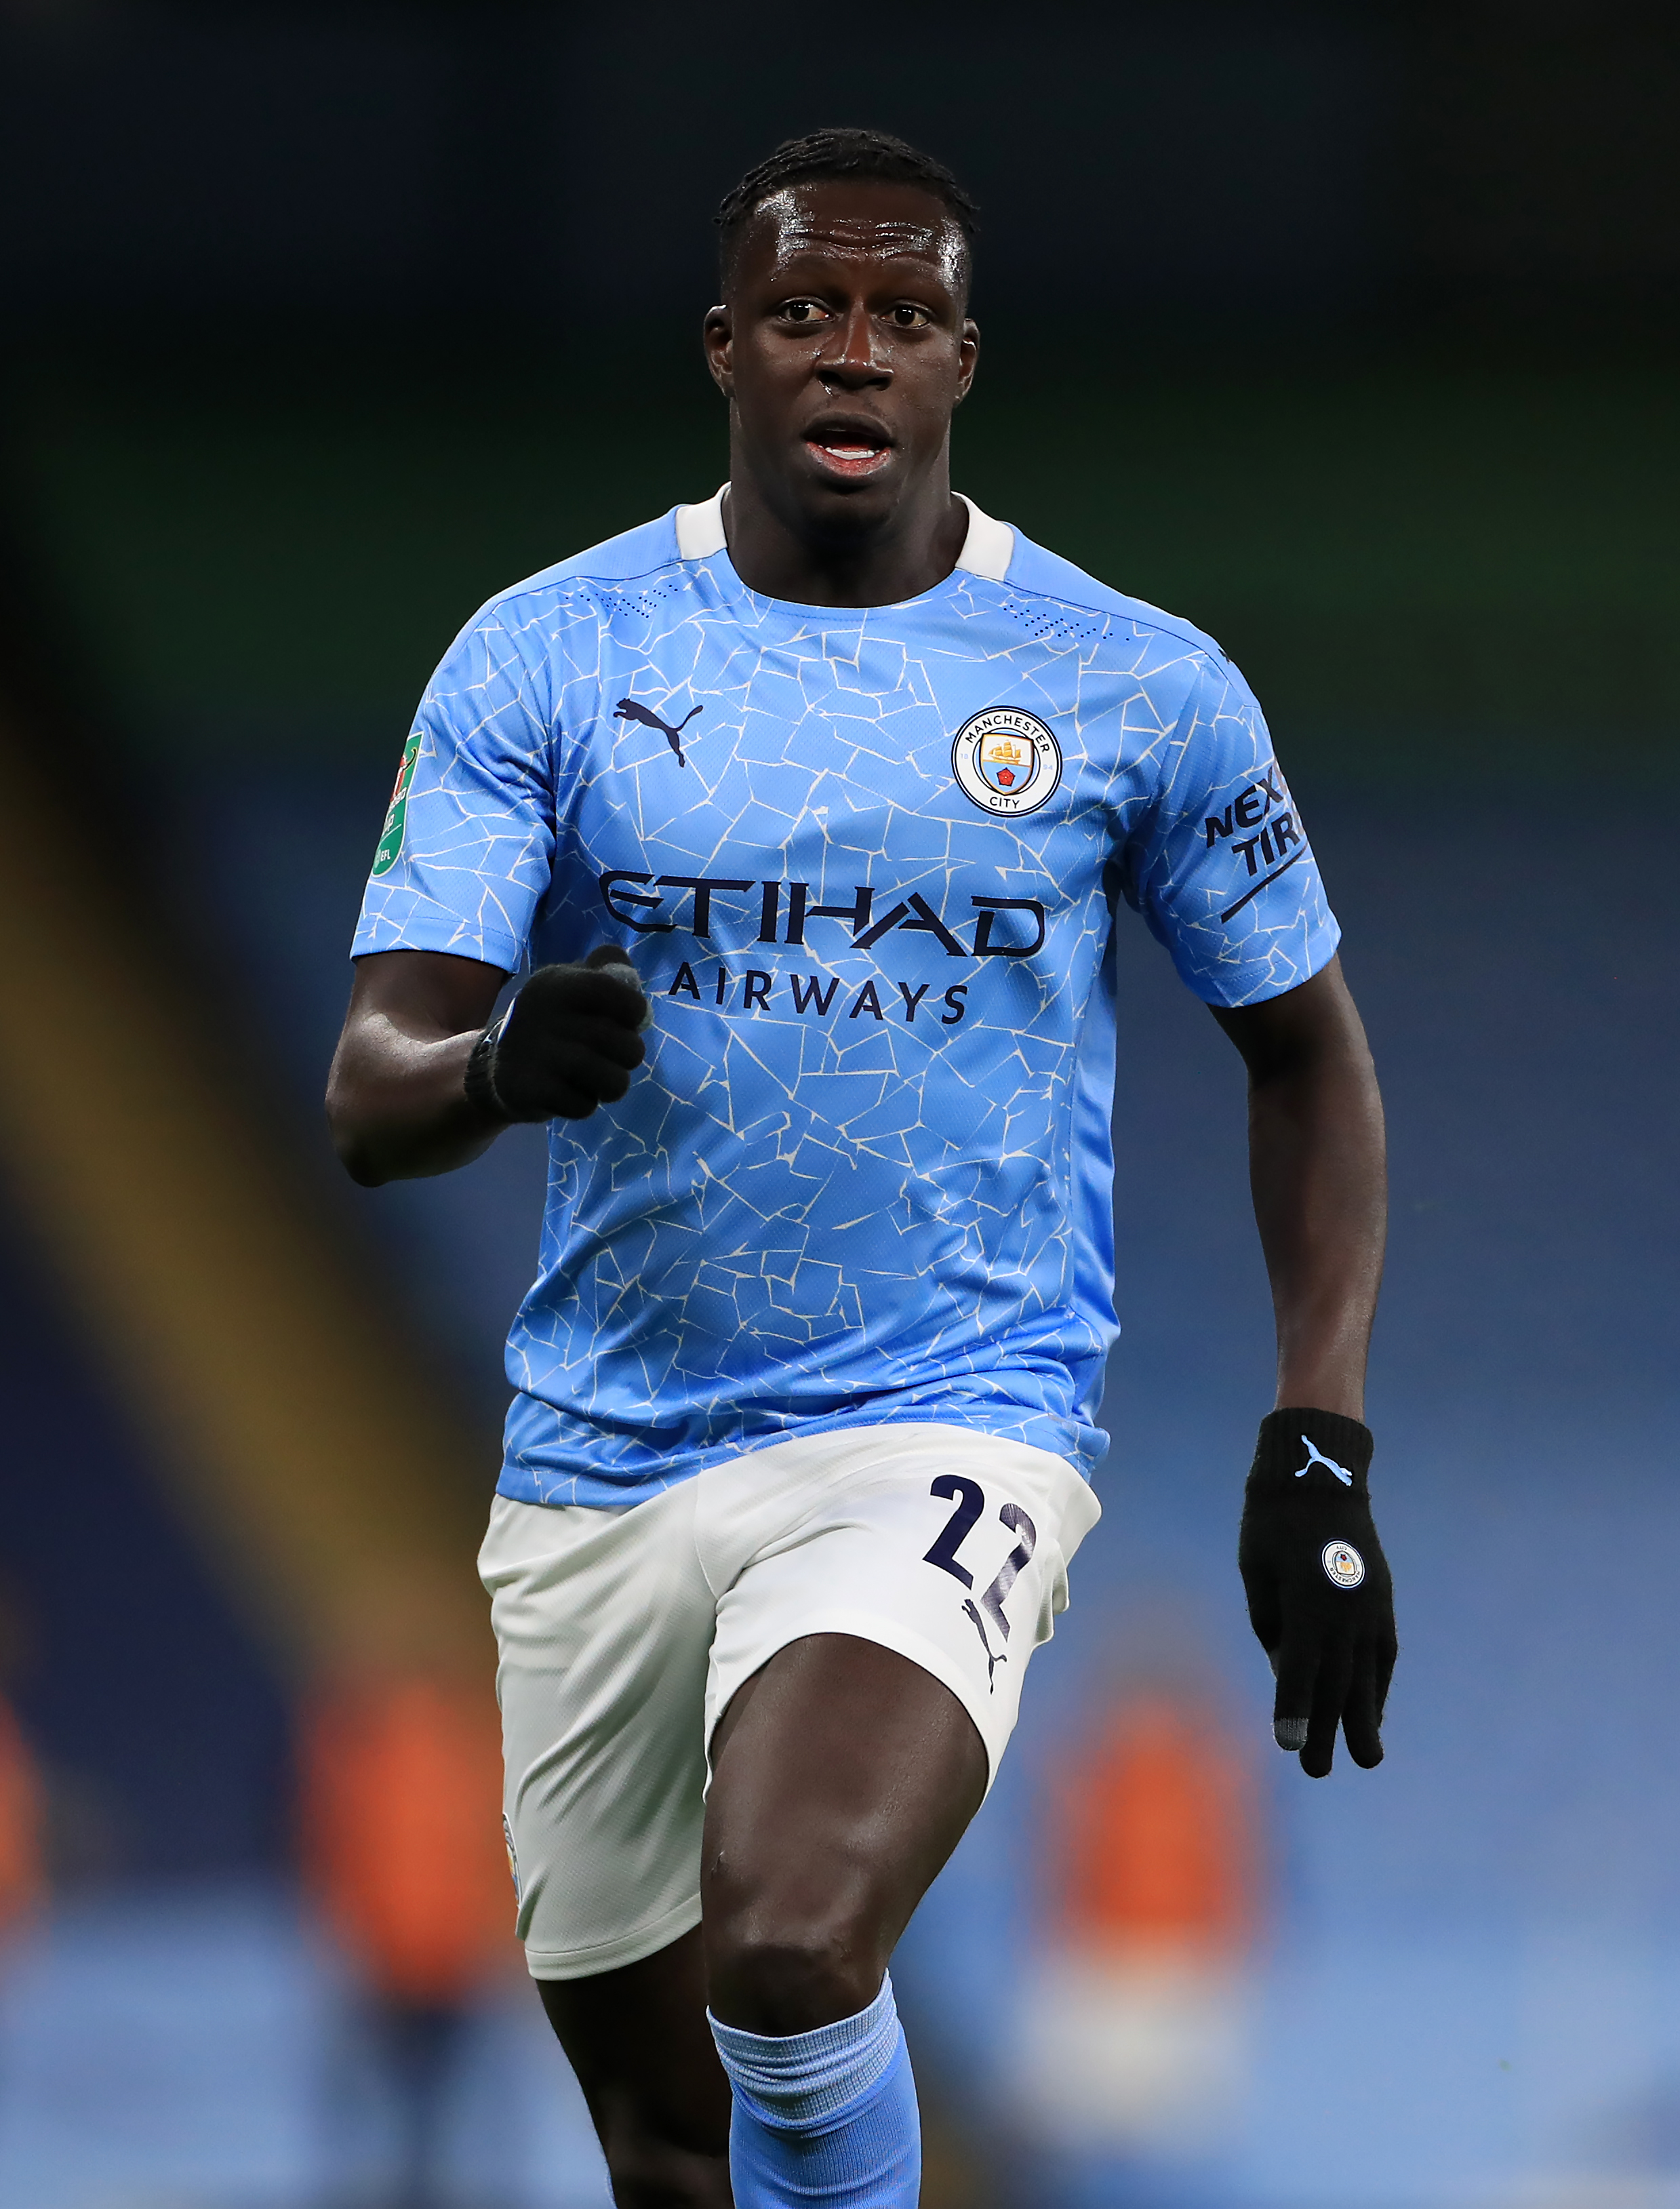 Benjamin Mendy will NOT face any action from Manchester City